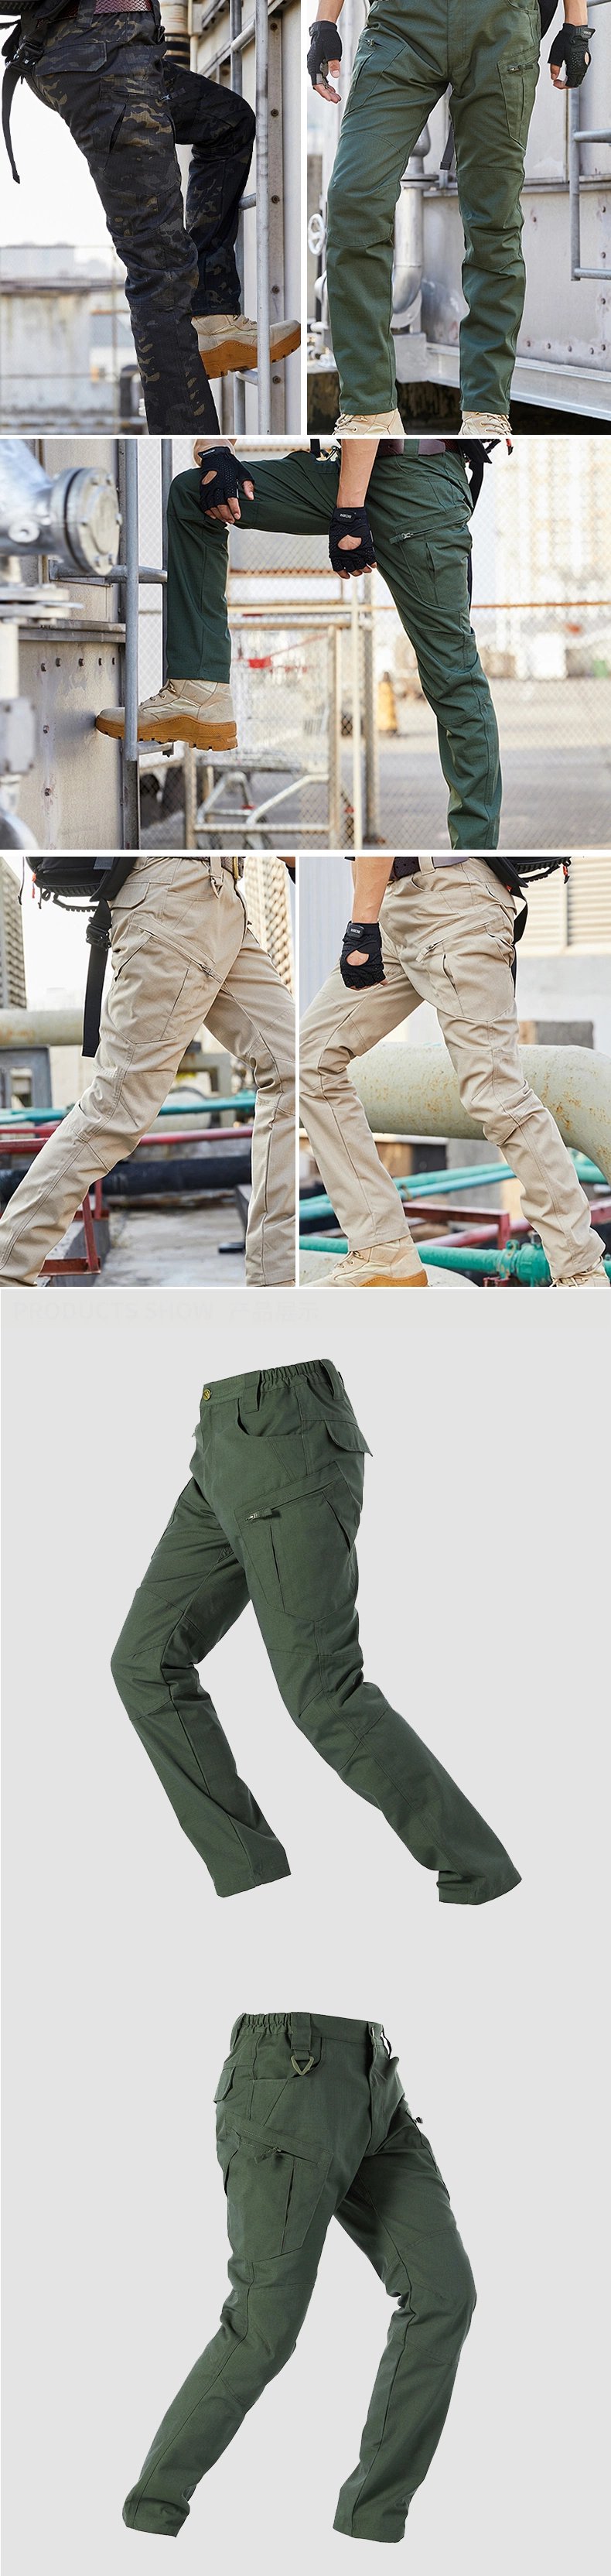 X8 Men&prime;s Tear Resistant and Waterproof Outdoor Hiking Pants Polyester Cotton Pants